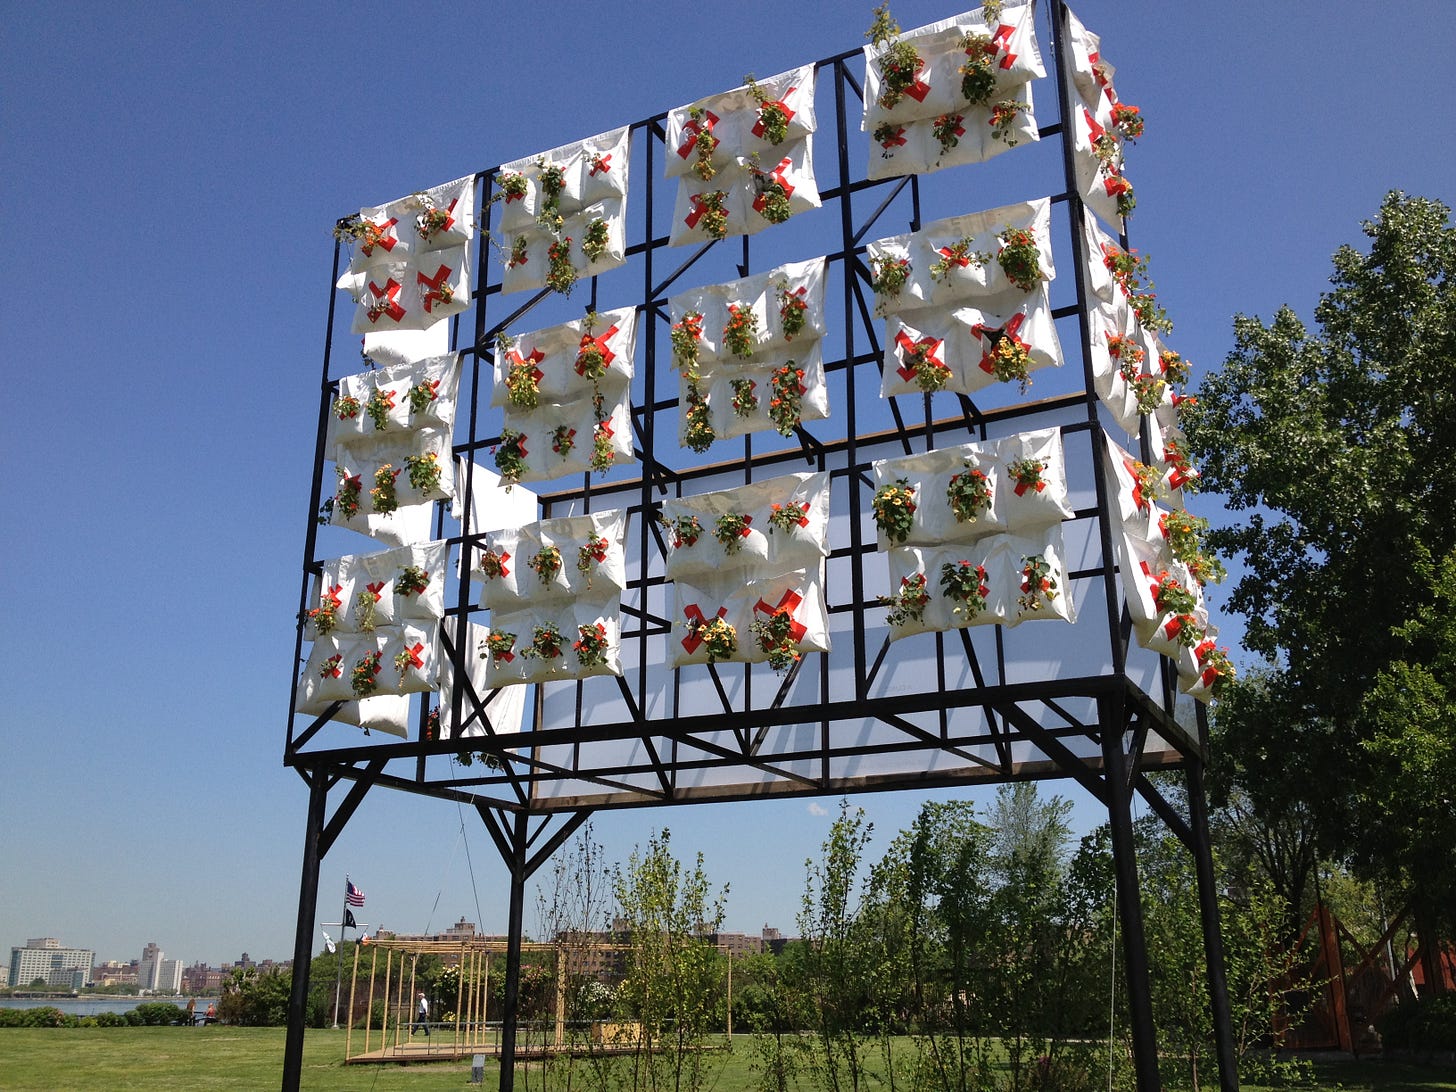 A large metal grid structure, as big as a highway billboard, has fabric bags hanging on three rows, with holes for plants to grow from. Each white bag is marked with a red "x" as part of Jeremijenko's "environmental health clinic."